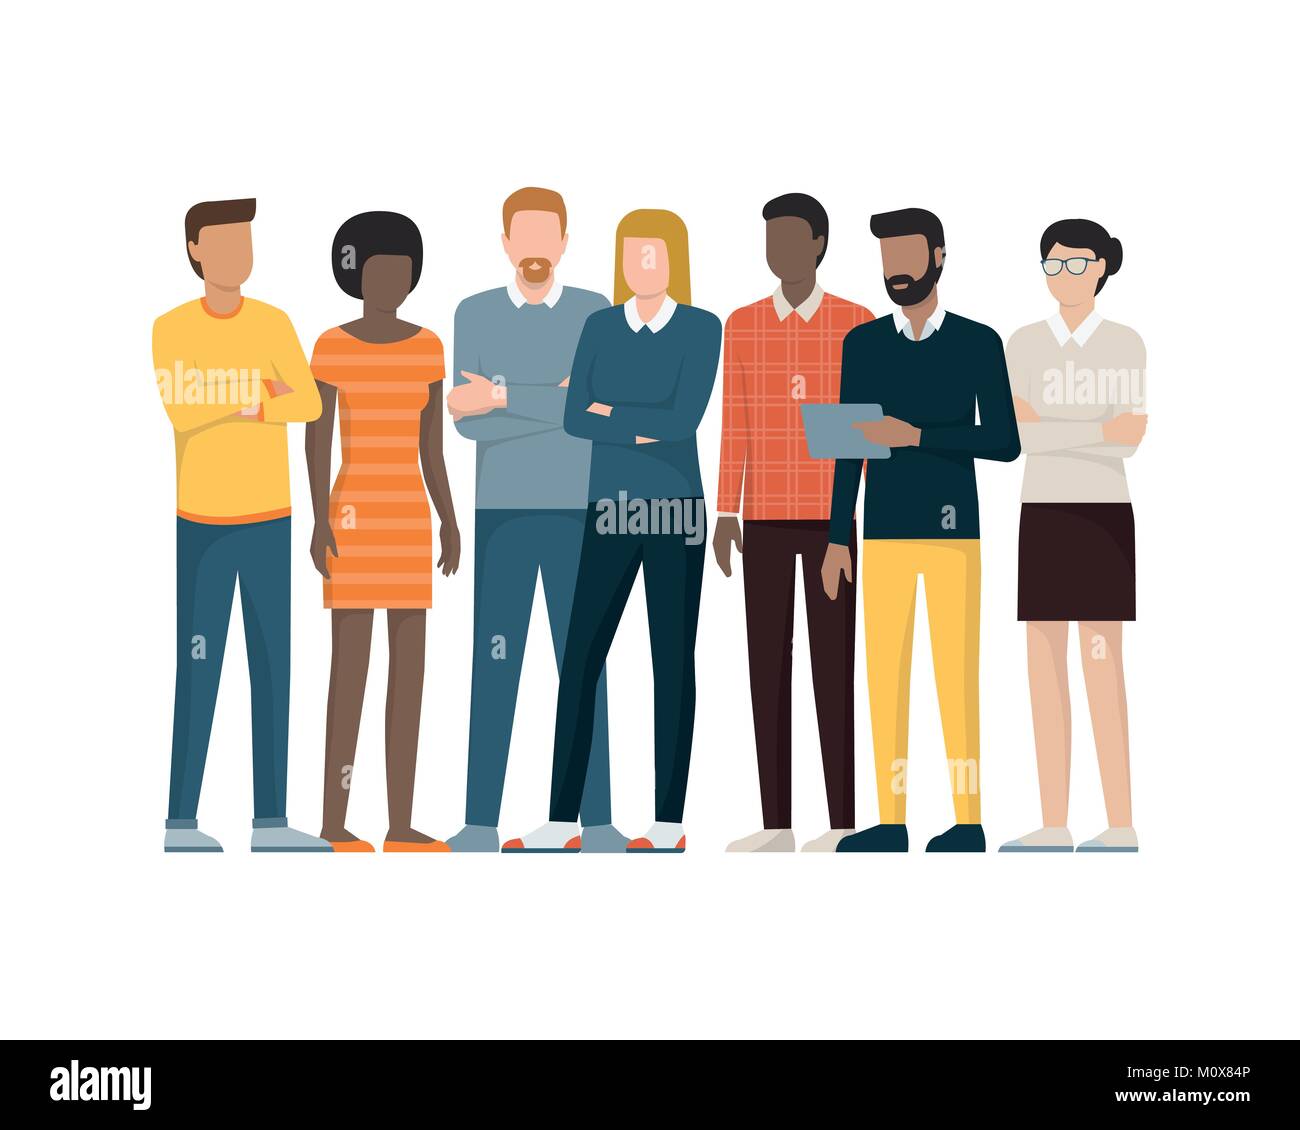 Multiethnic group of people standing together, community and togetherness concept Stock Vector